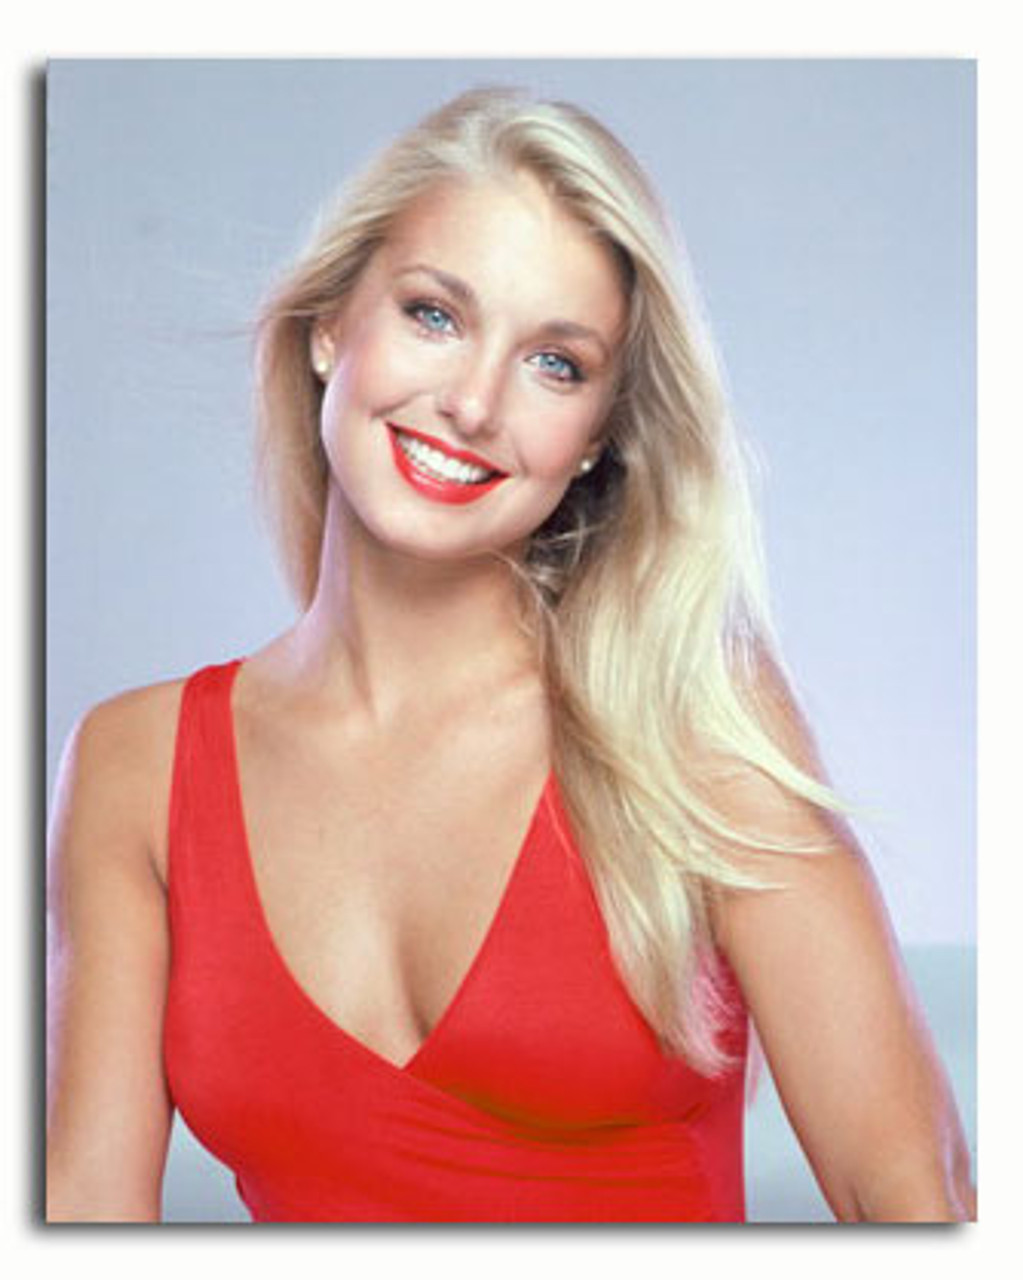 SS3441100) Movie picture of Heather Thomas buy celebrity photo and posters at Starstills.com